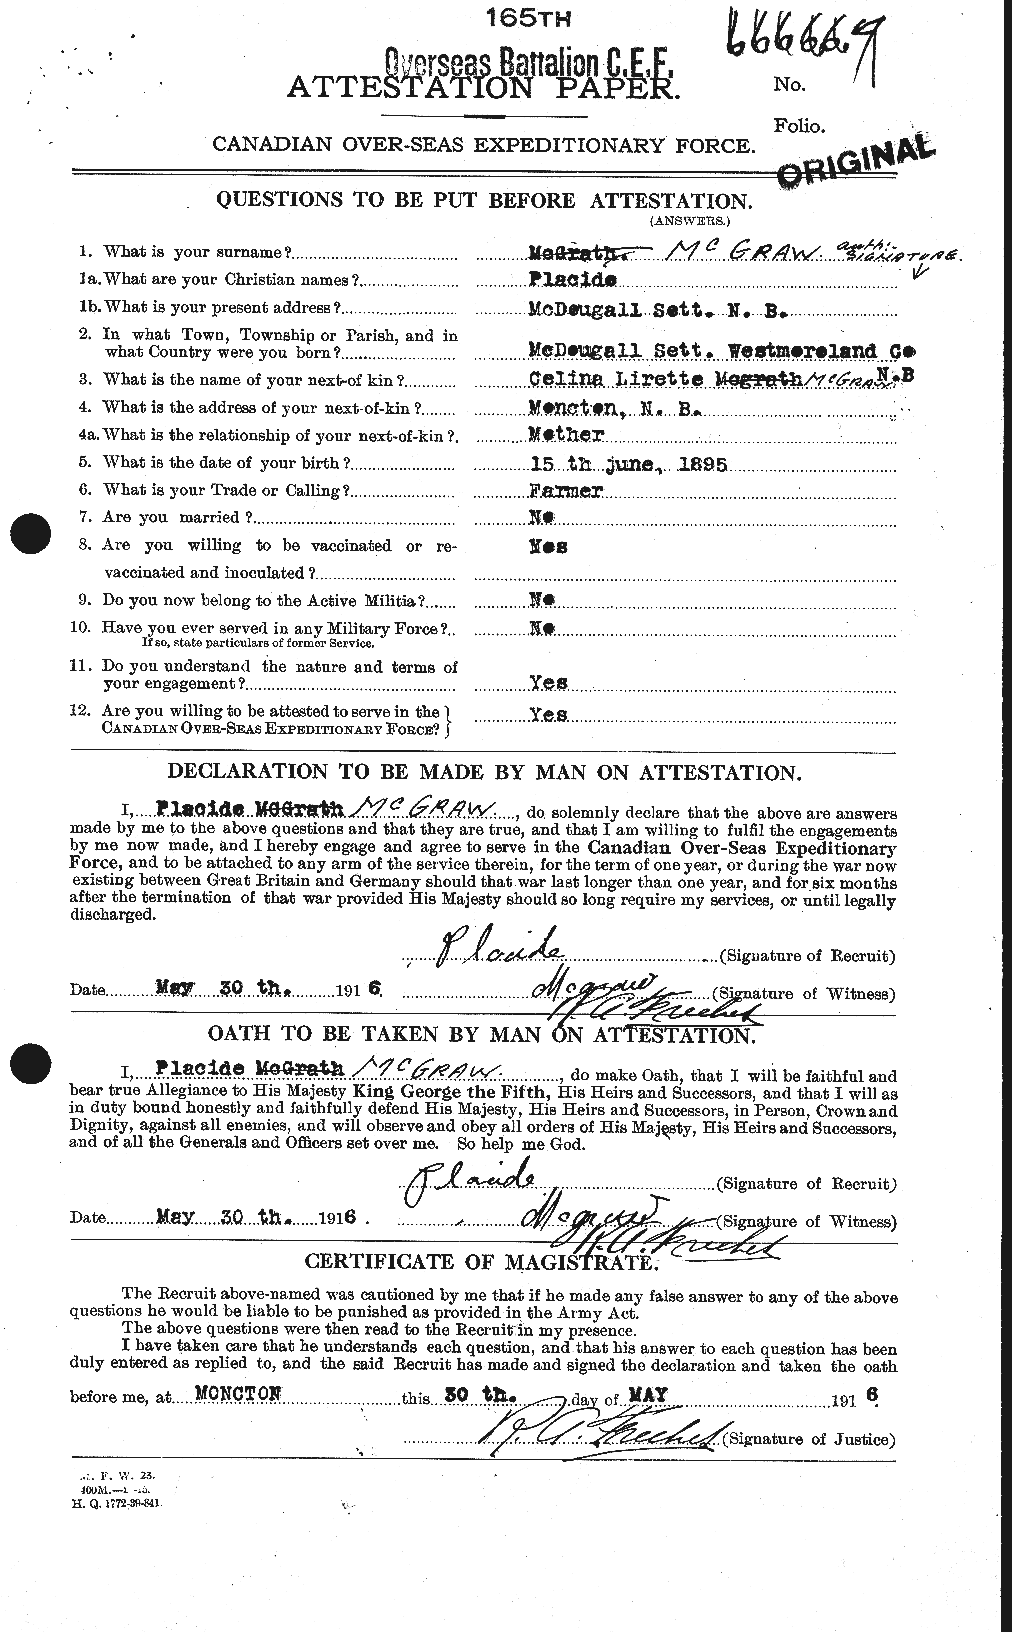 Personnel Records of the First World War - CEF 523748a